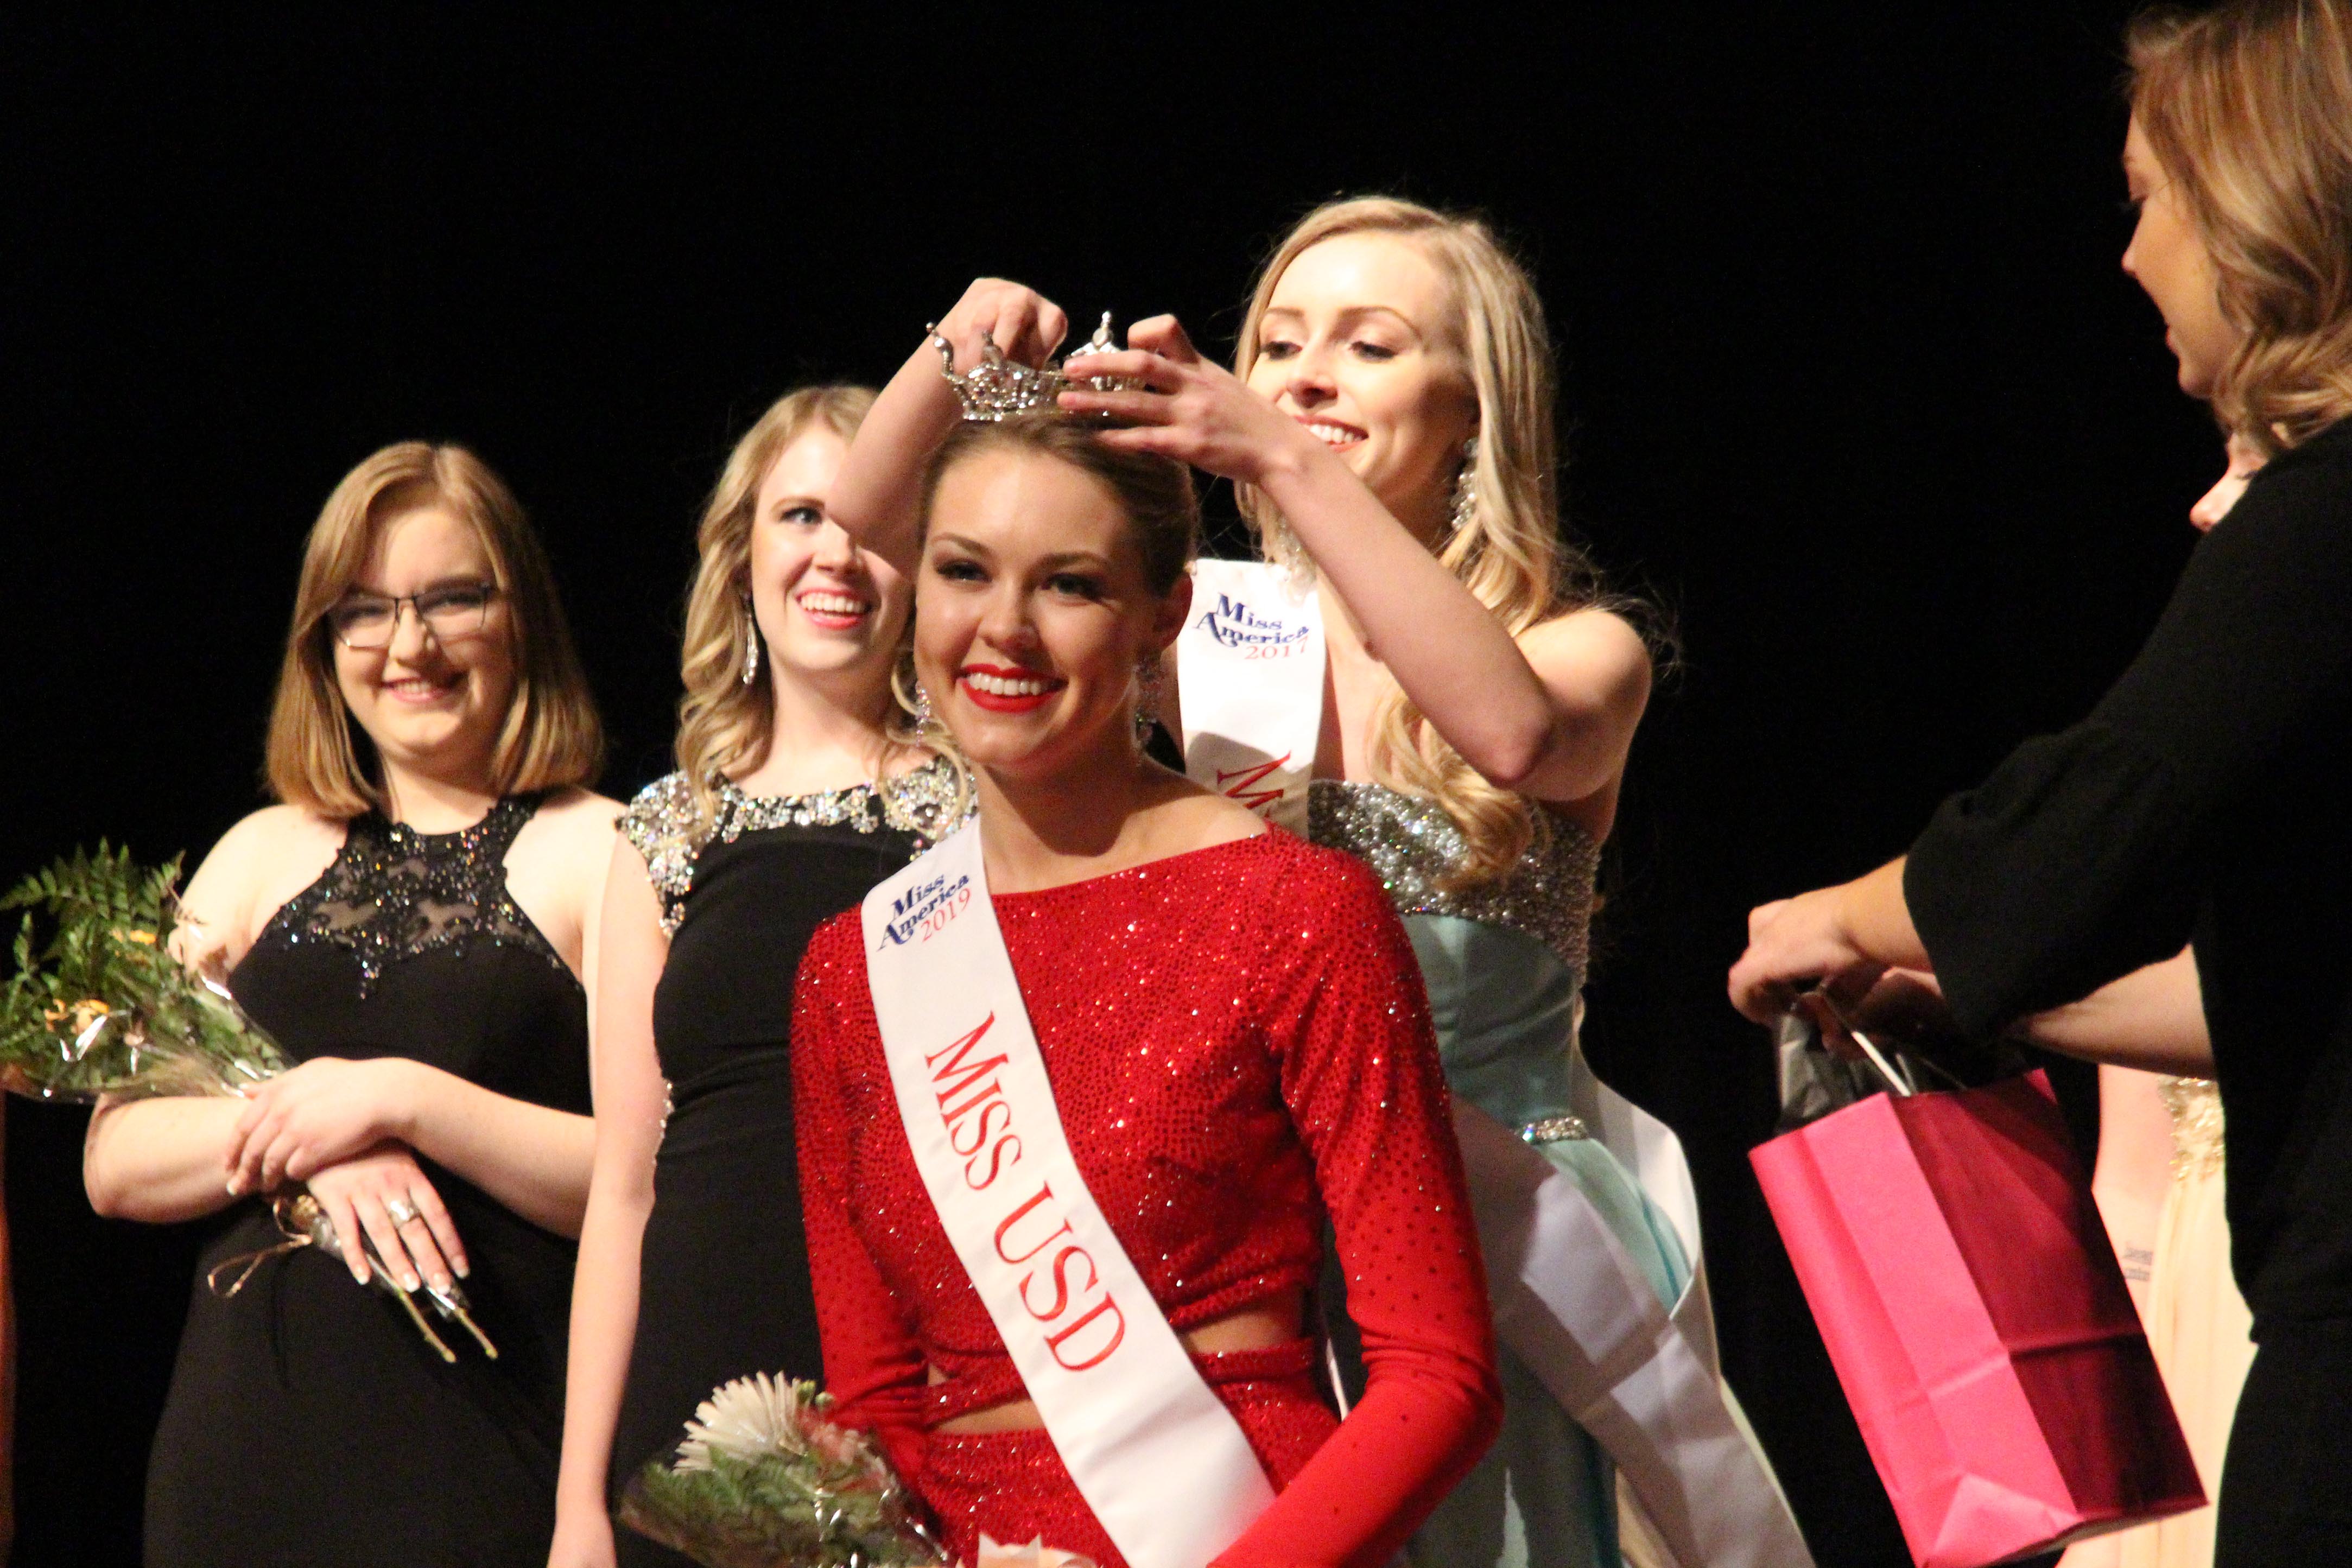 A new set of titleholders looks forward to a year of service, Miss South Dakota pageant